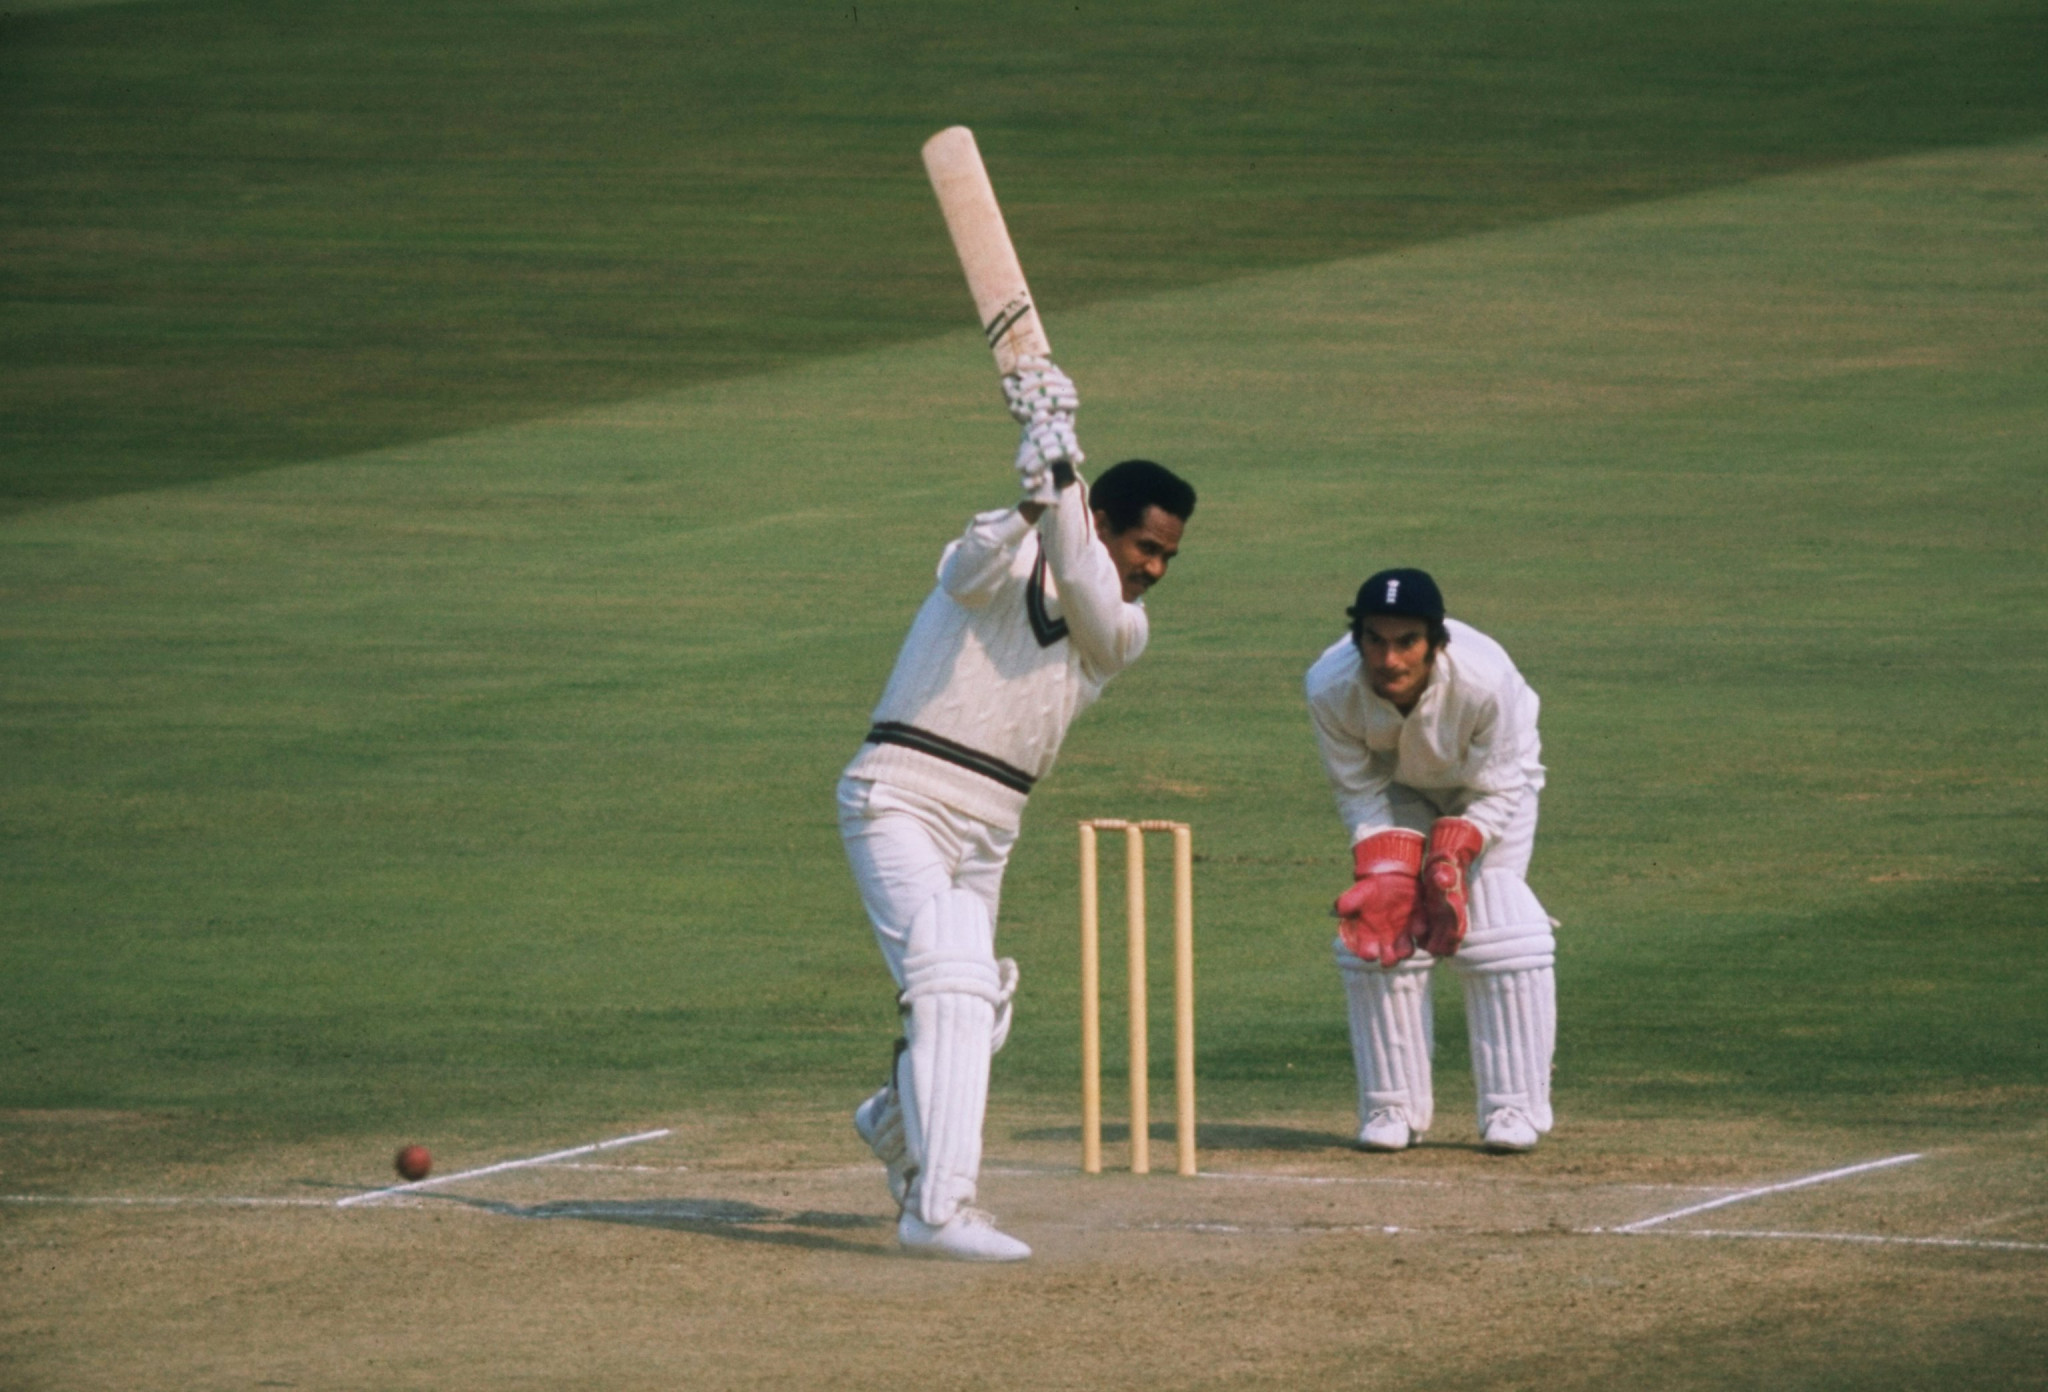 Sir Garfield Sobers only played a single one day international match and missed the inaugural World Cup through injury ©Getty Images